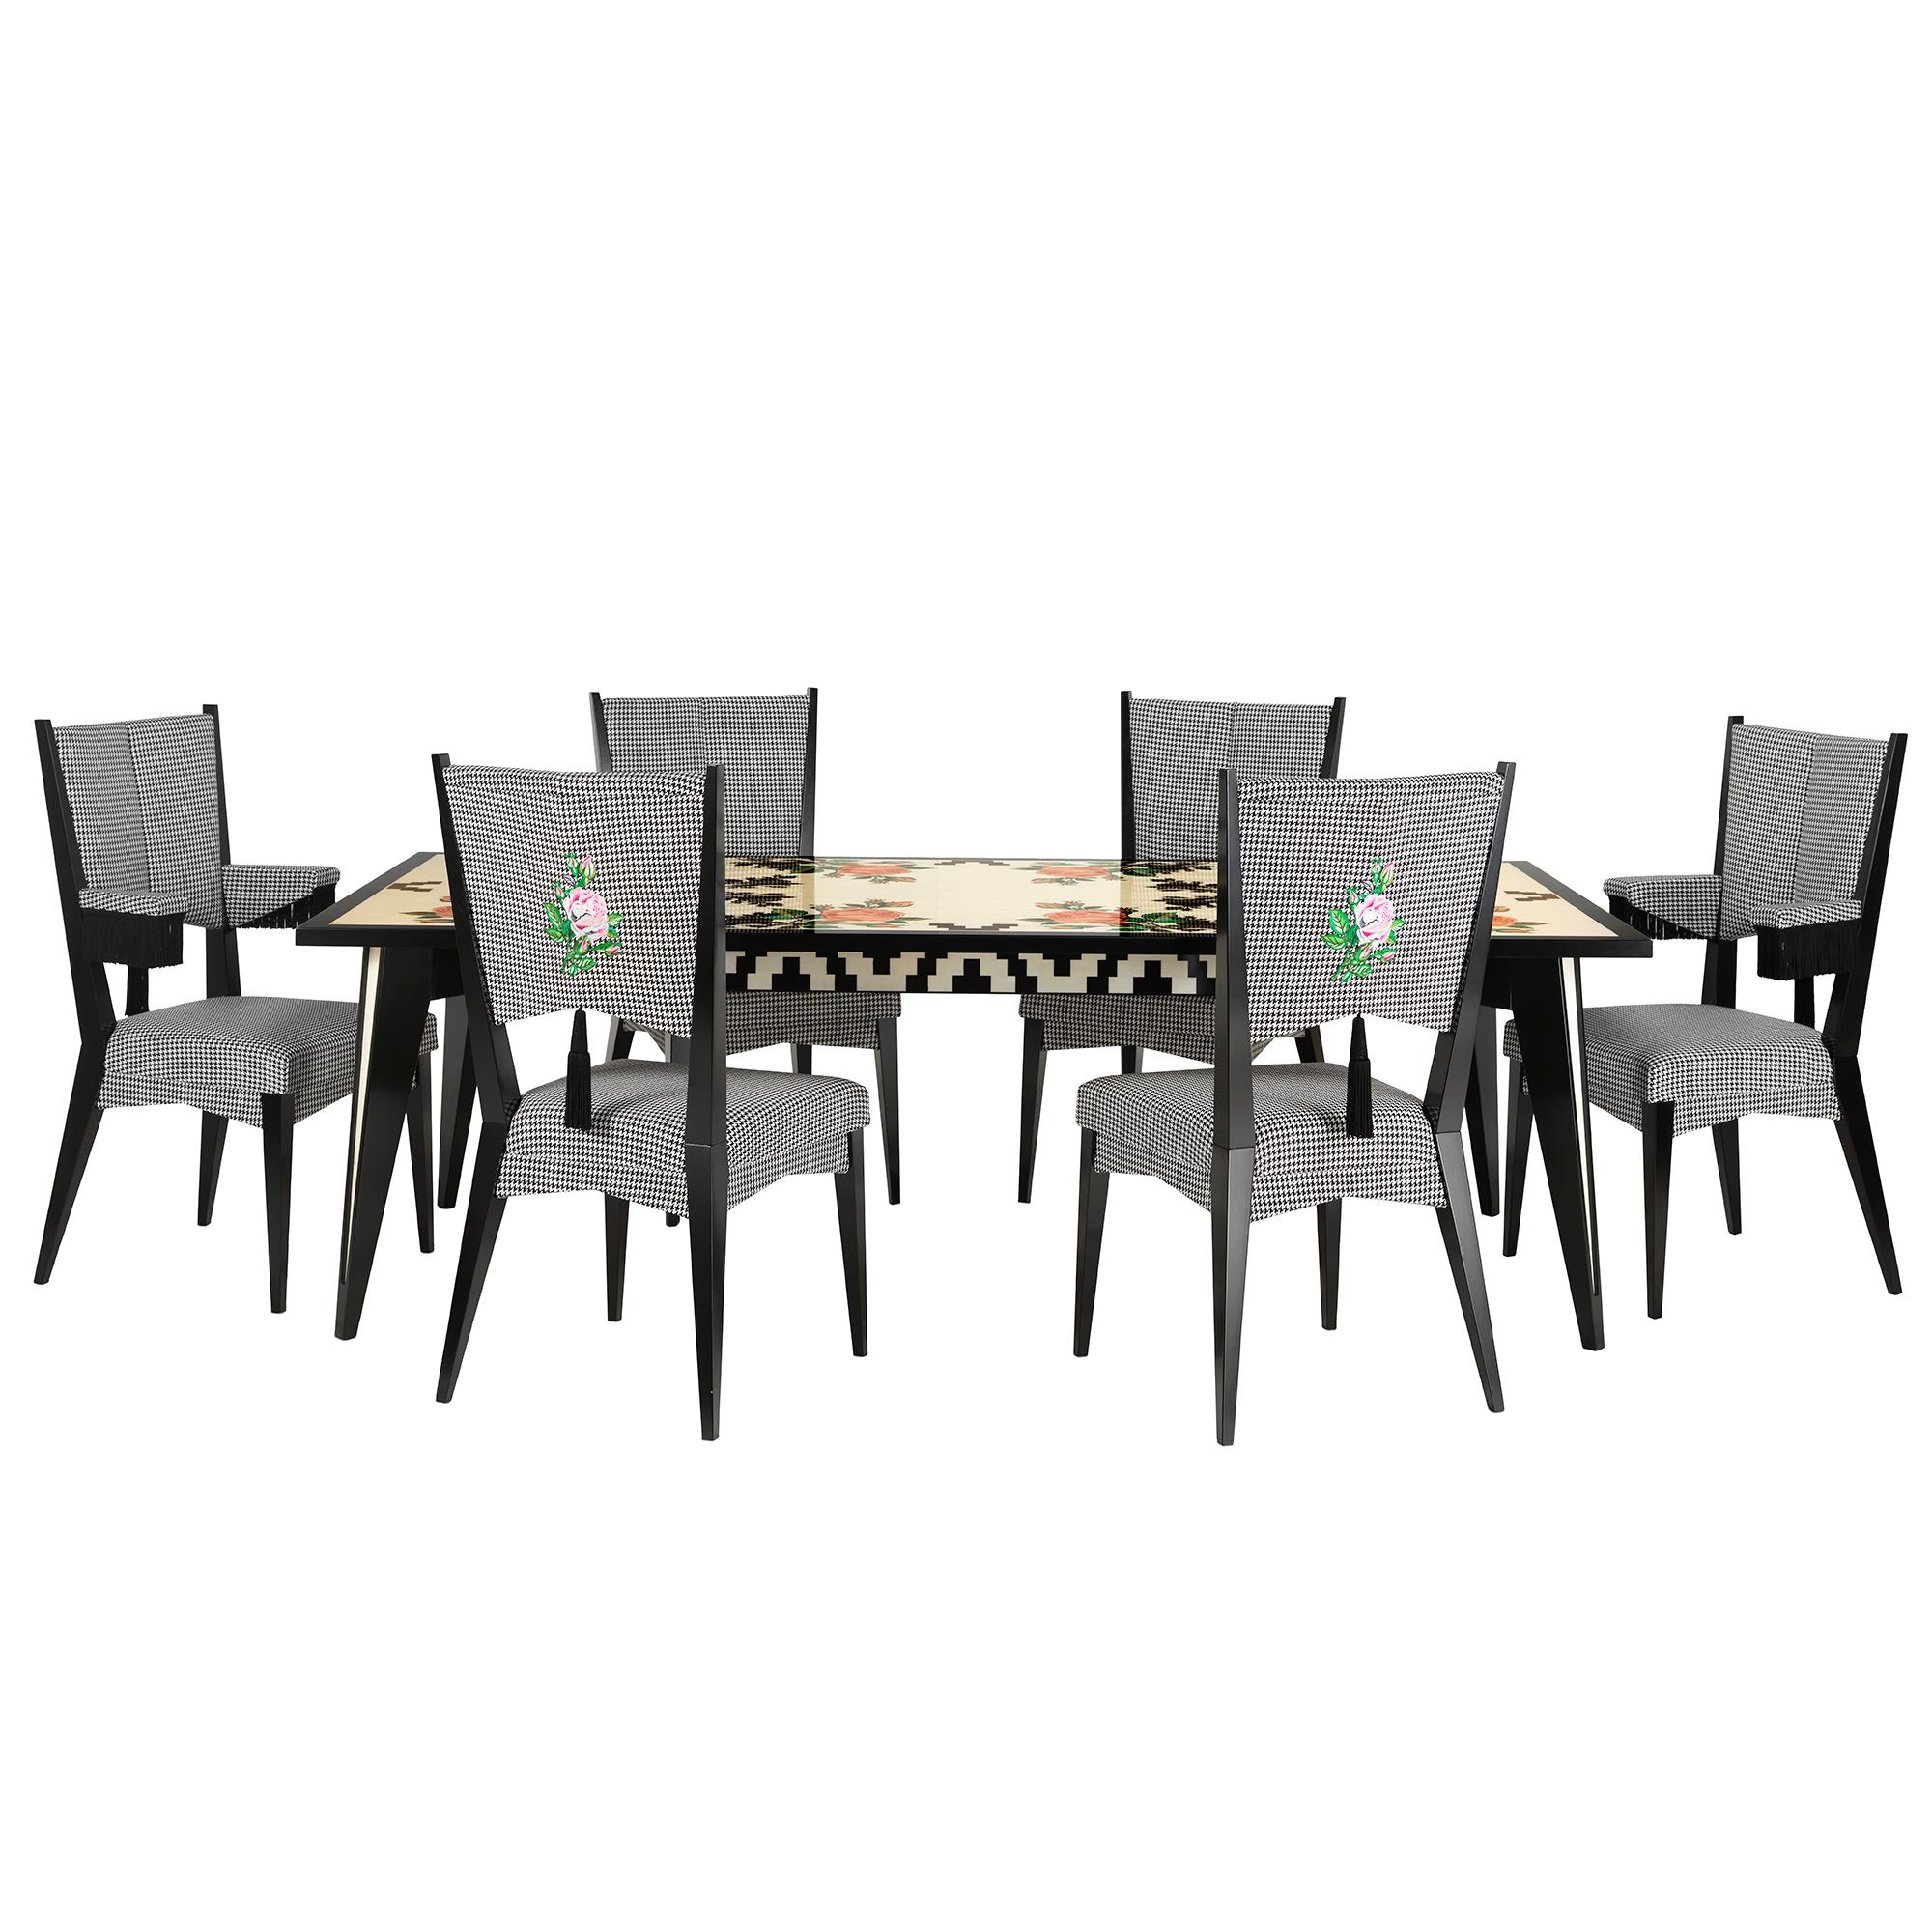 Contemporary 6 Seat Rectangular Table with Roses (Italienisch) im Angebot